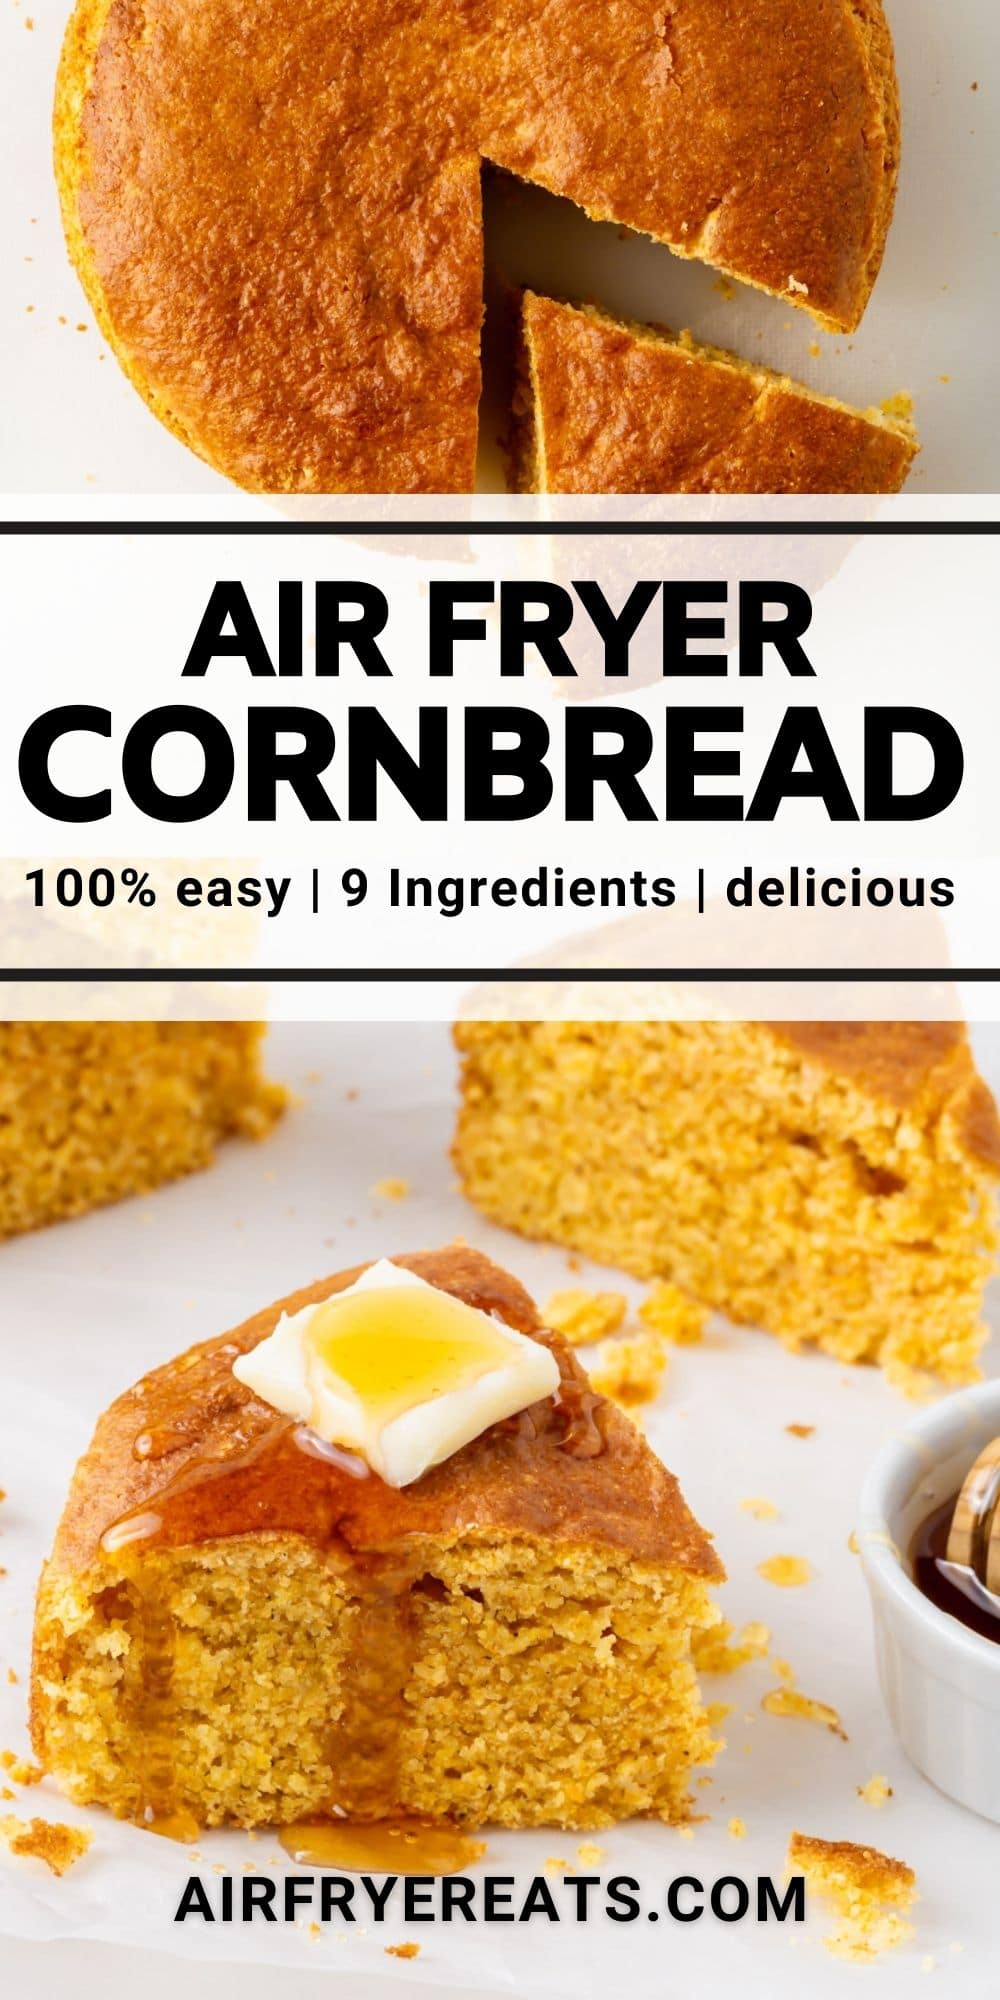 Homemade Air Fryer Cornbread is so simple to make, and you'll be enjoying it in under 30 minutes. This southern style comfort food is a delicious side dish to go with any meal. #airfryer #cornbread via @vegetarianmamma